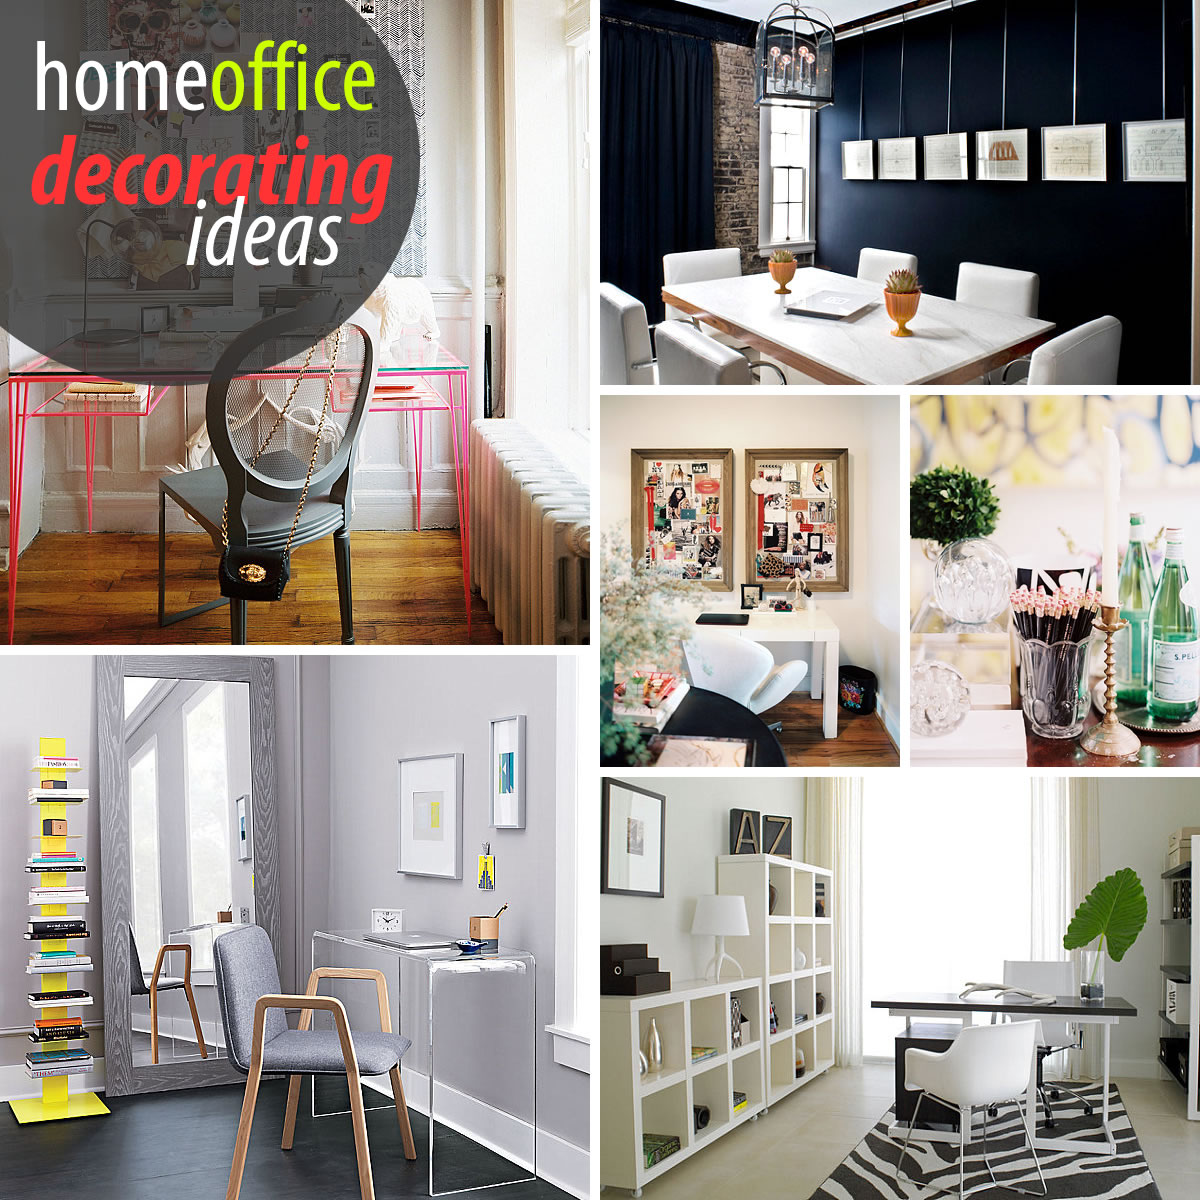 Creative Home Office Decorating Ideas